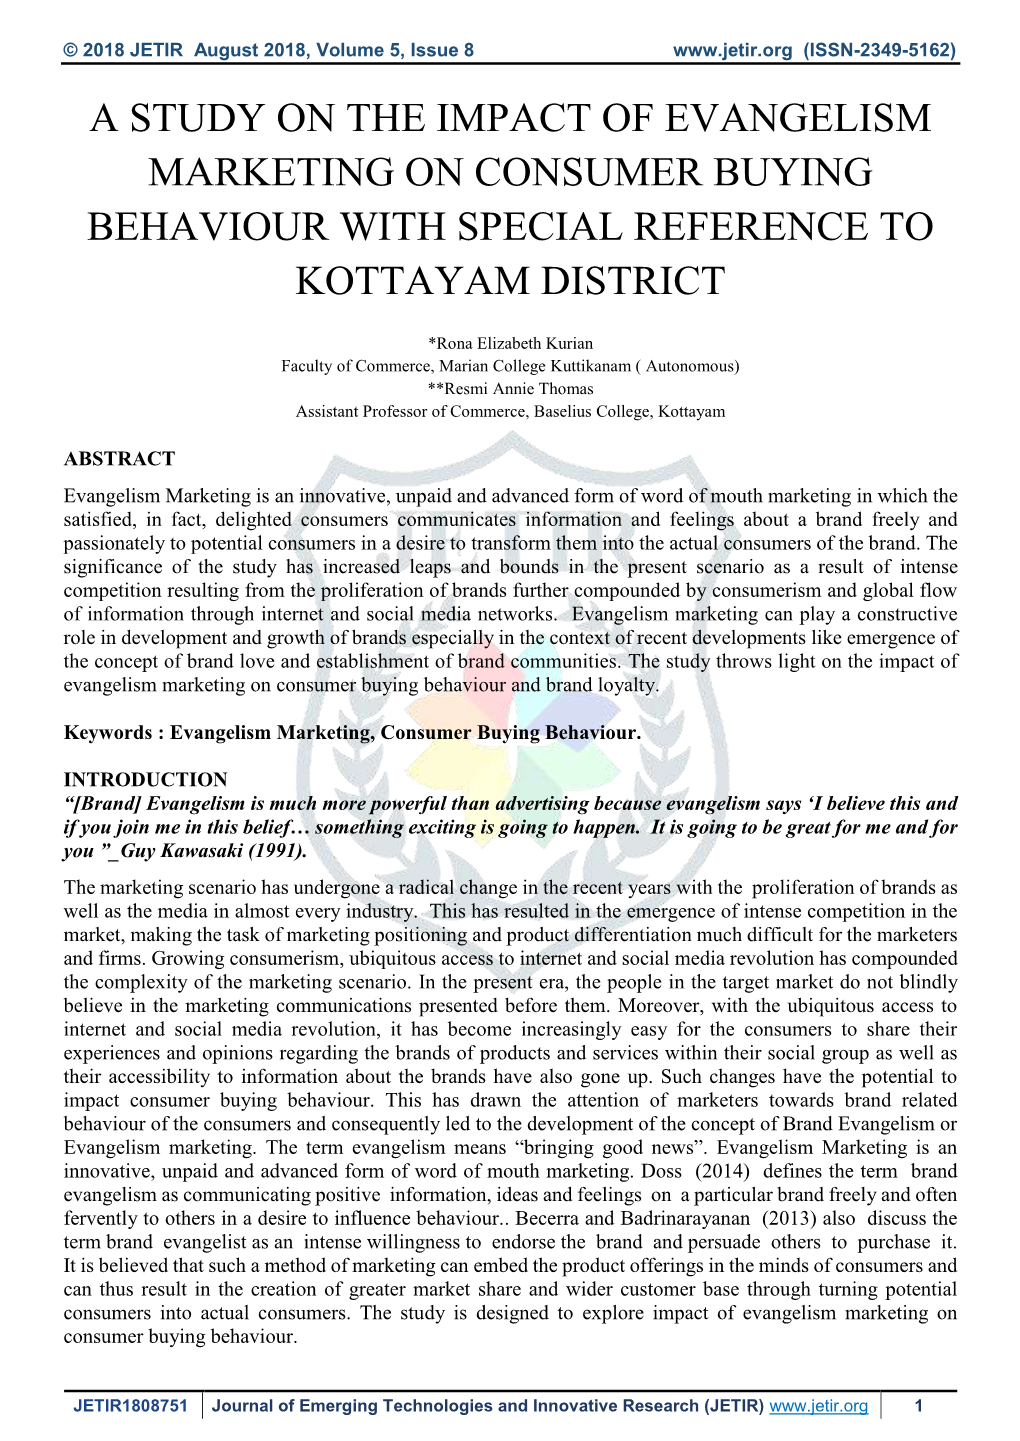 A Study on the Impact of Evangelism Marketing on Consumer Buying Behaviour with Special Reference to Kottayam District